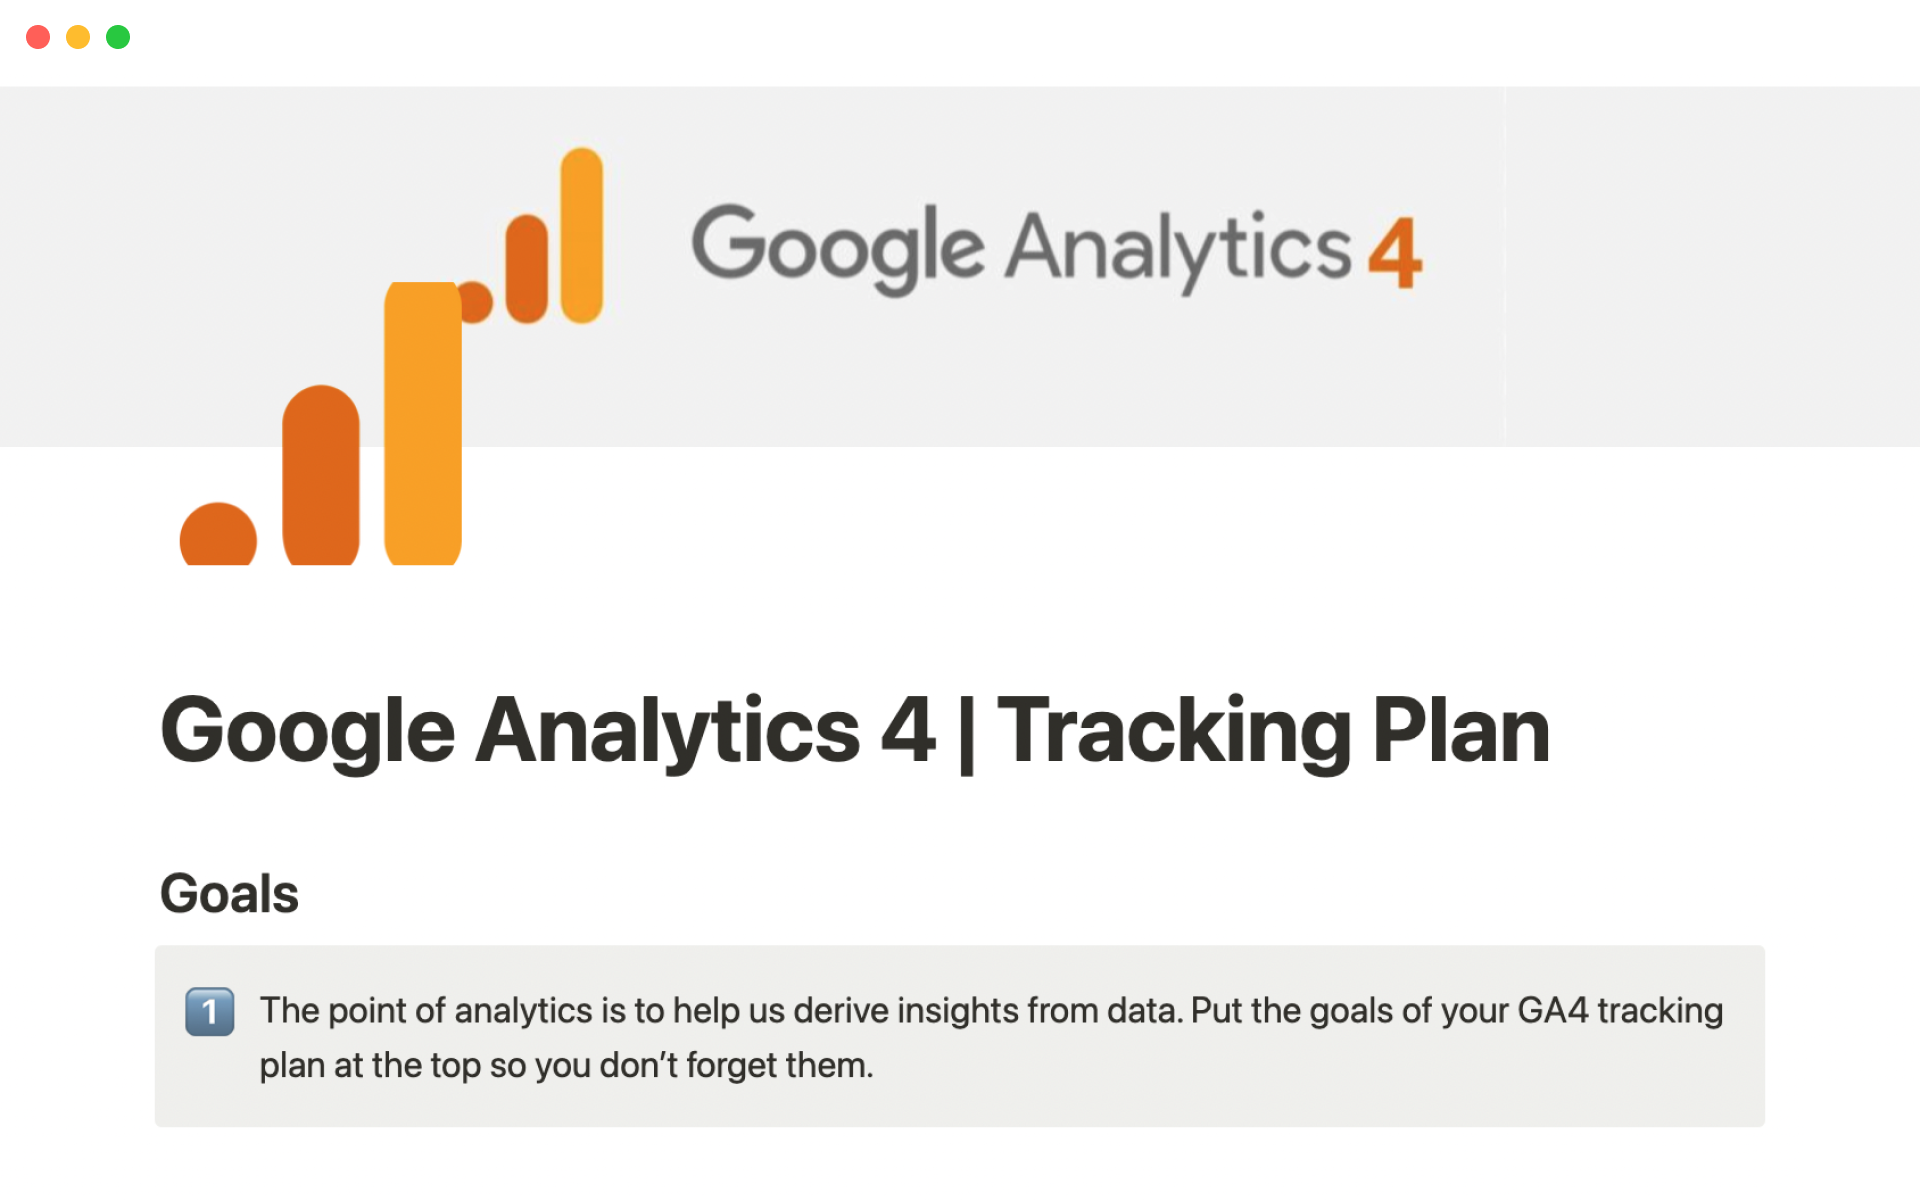 Helps marketing or product managers make your GA4 instance useful and fulfill your analytics goals.